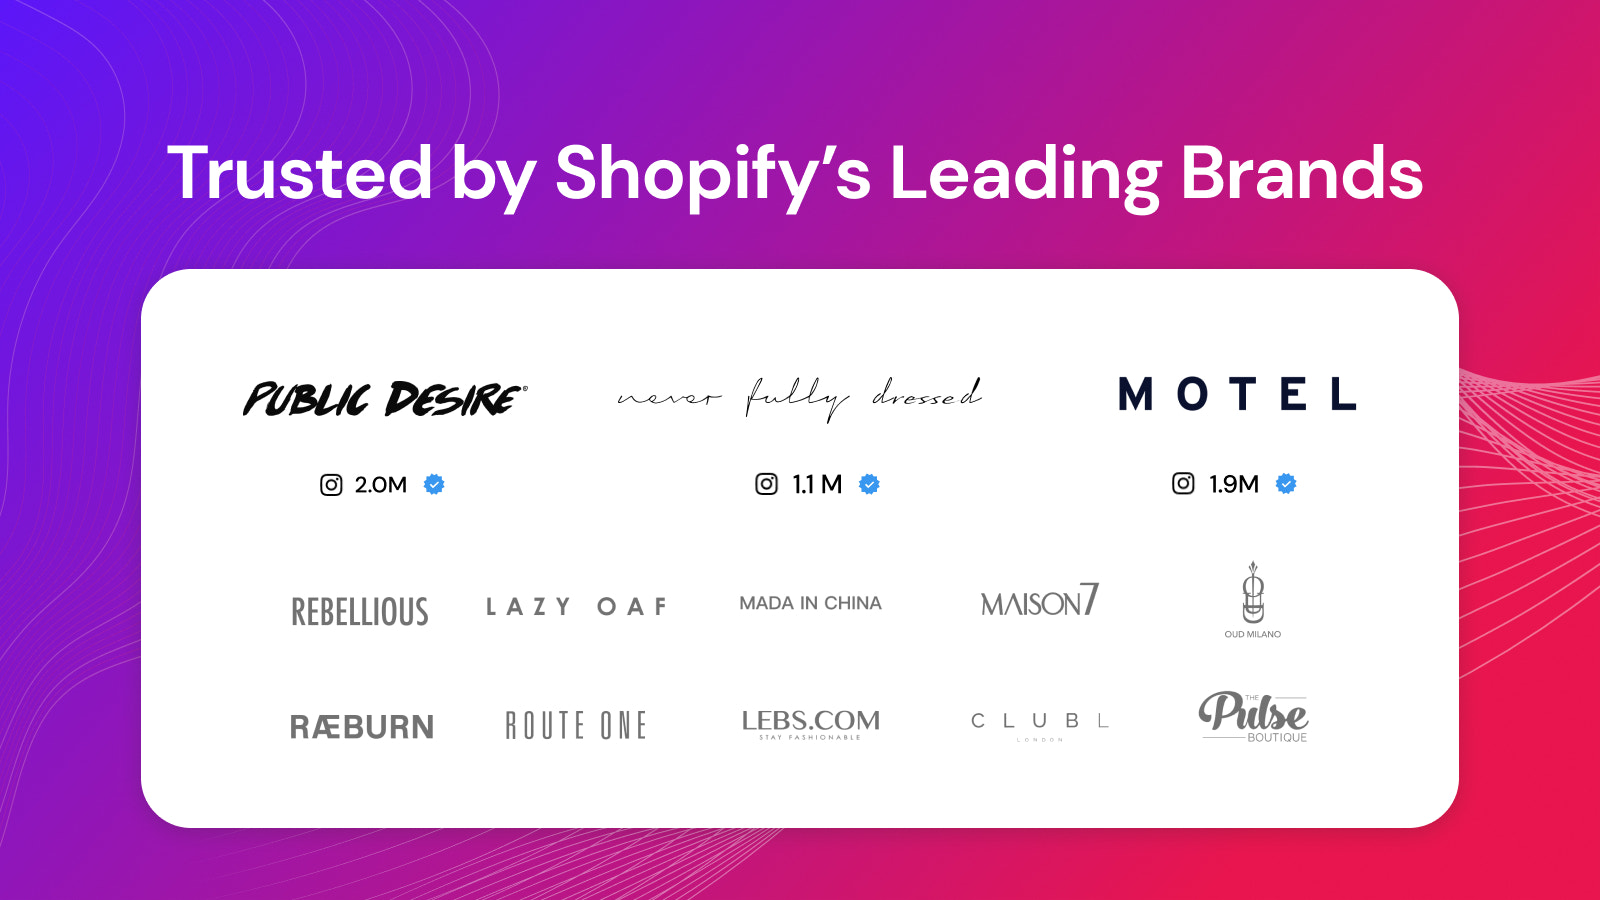 Trusted by Shopify's leading brands